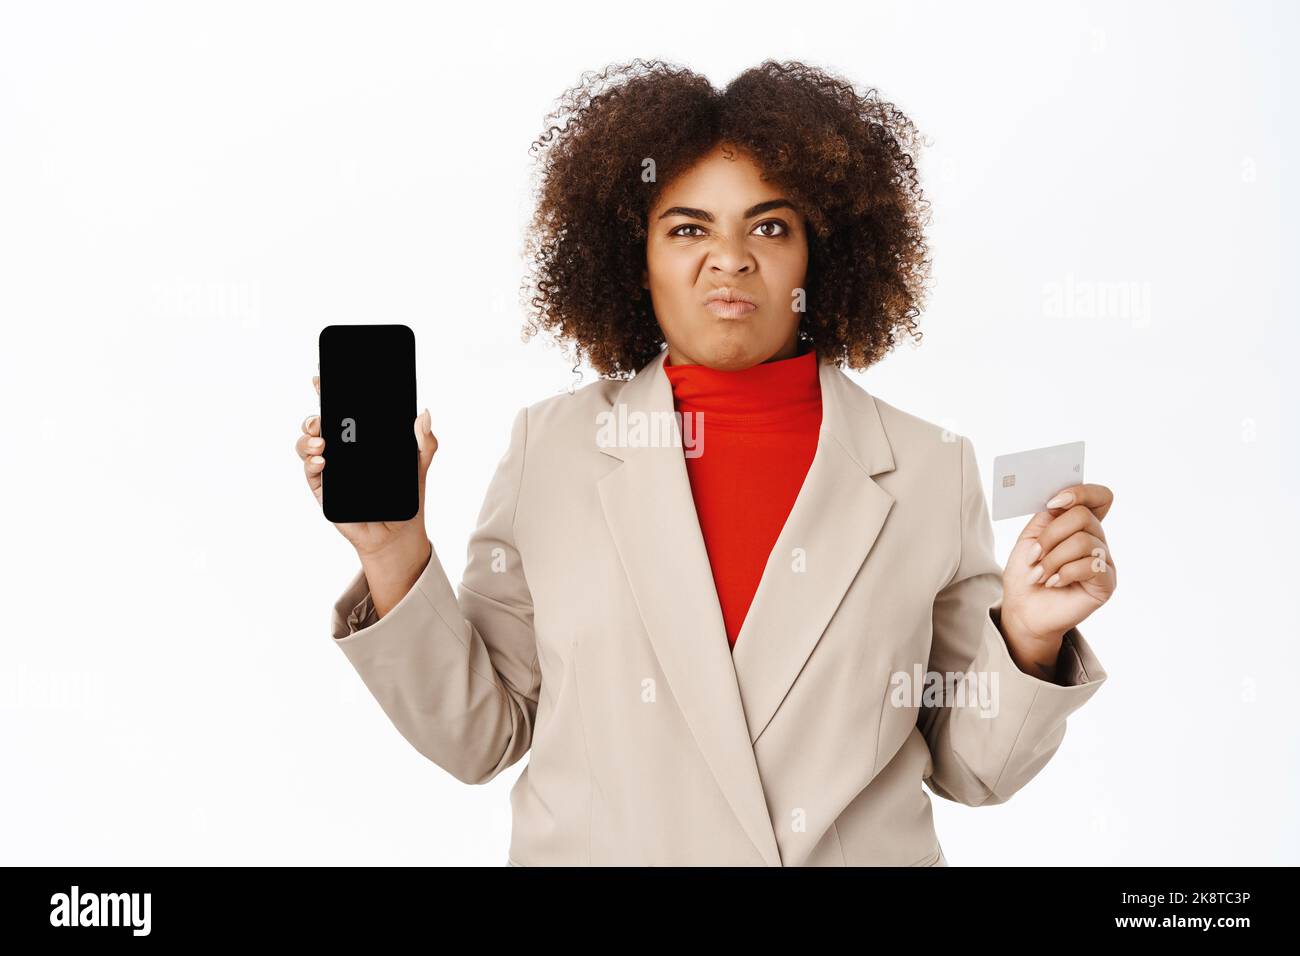 Disappointed african american businesswoman shows telephone screen, mobile interface and credit card, express dislike, stands over white background Stock Photo